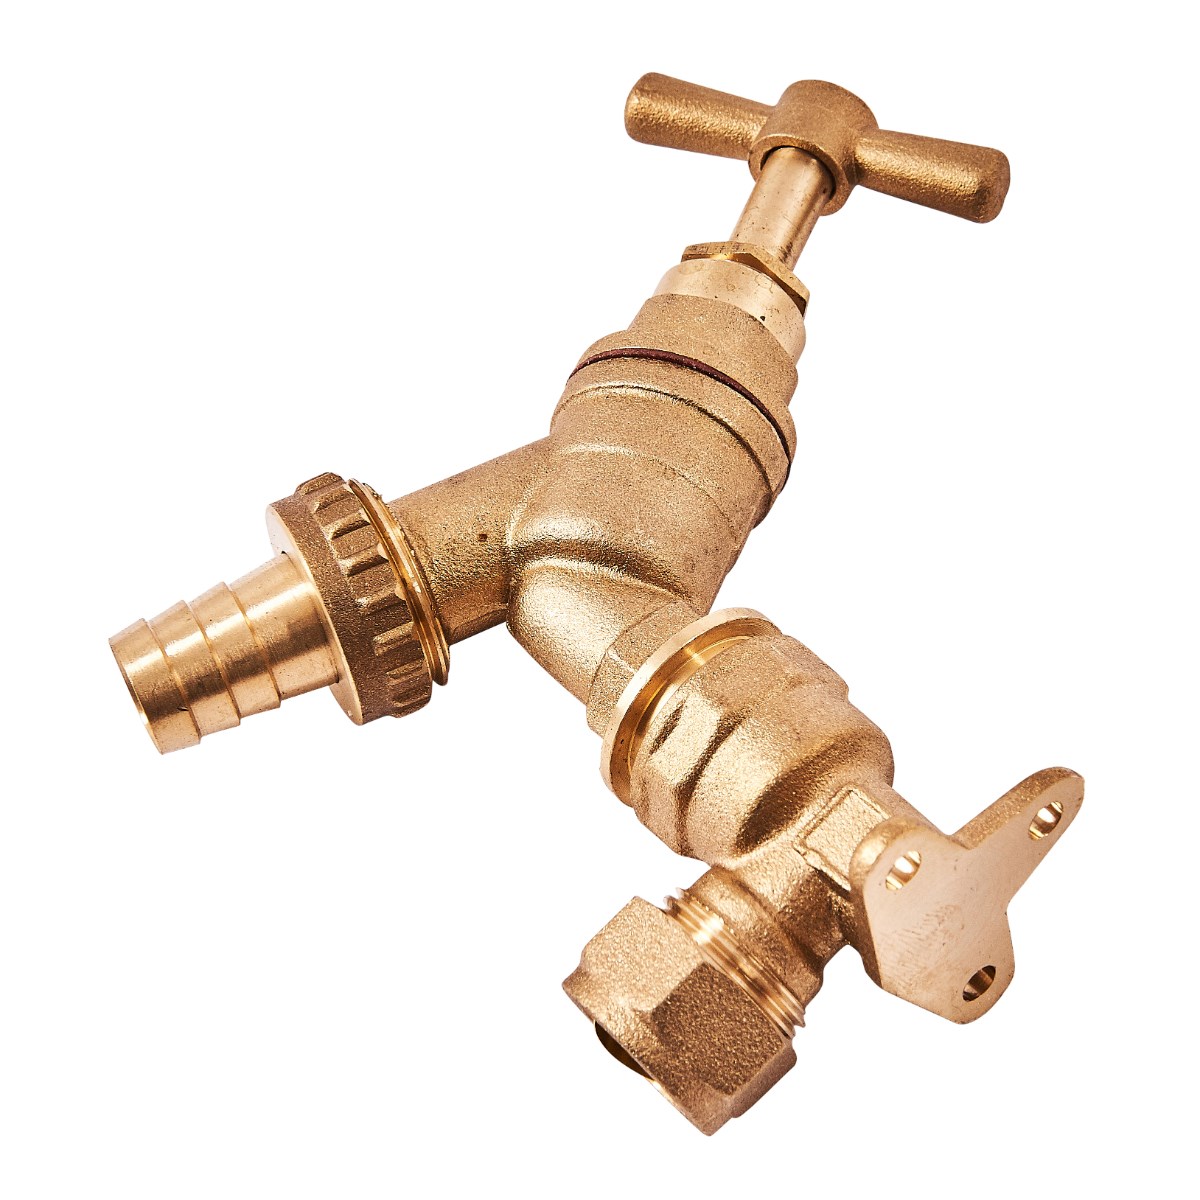 Am-Tech 1/2 x 3/4-inch Brass Tap with Hose Adaptor new 